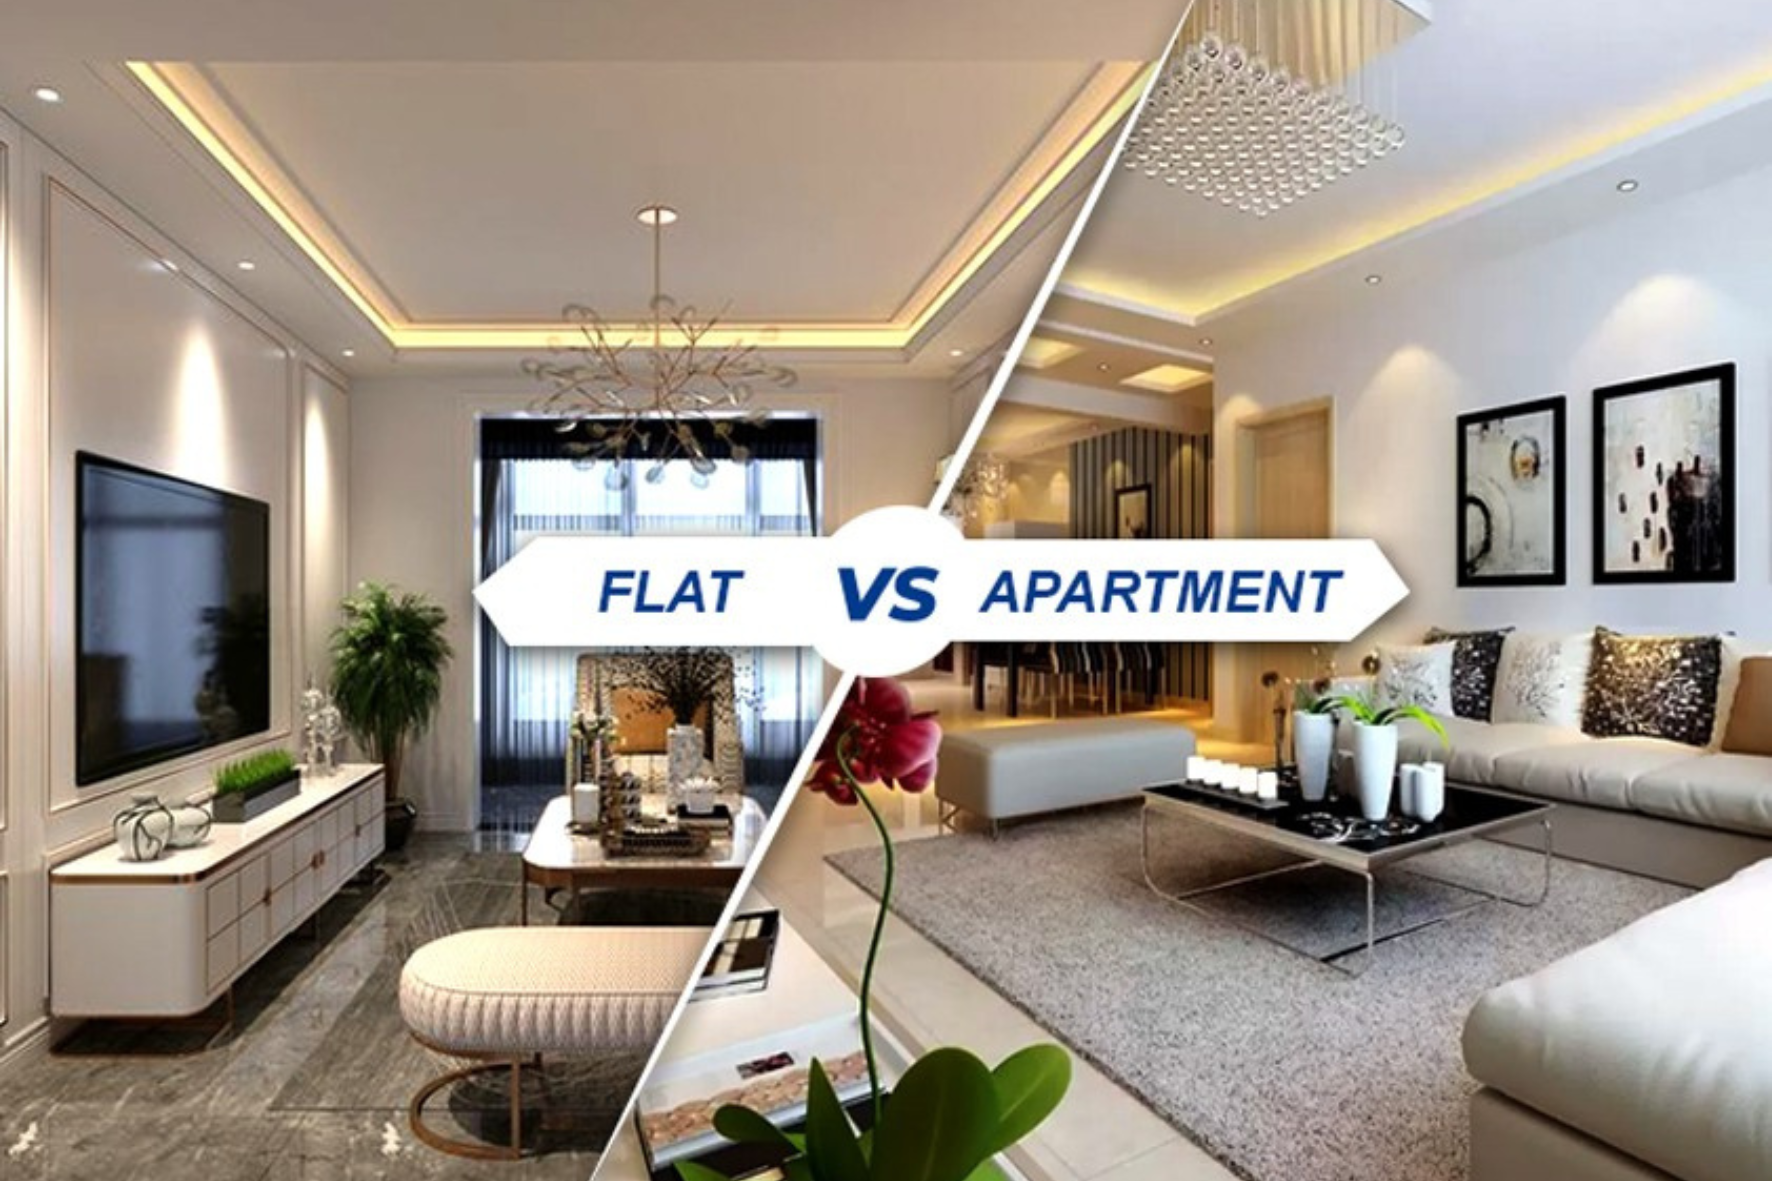 uploads/blog/What_is_the_difference_between_Flat_and_Apartment_Flat_vs_Apartment.png